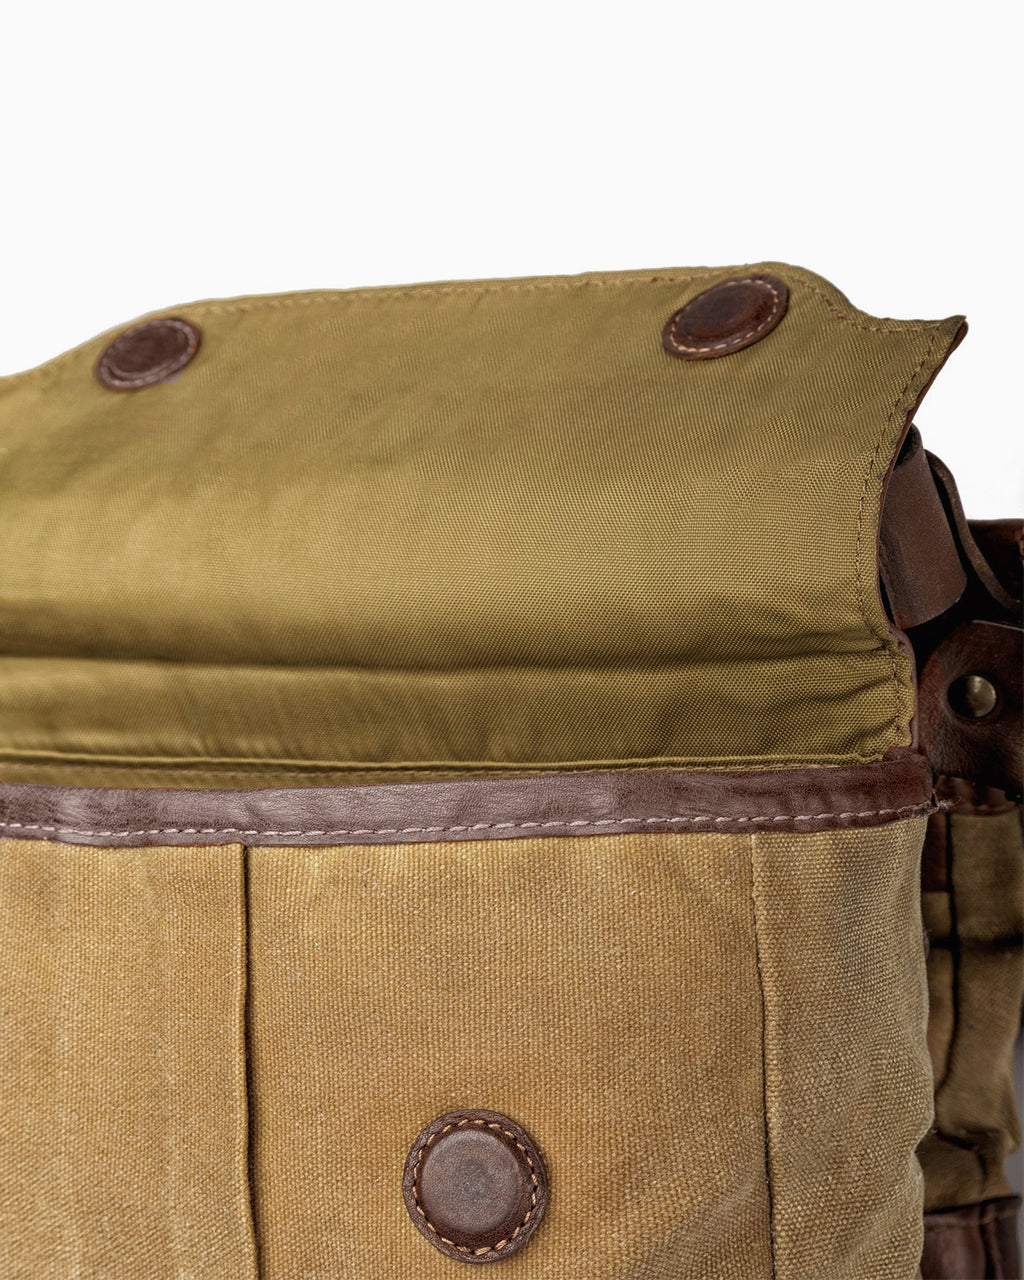 Mission Mercantile's White Wing Waxed Canvas Cooler Bag Smoke / Forest